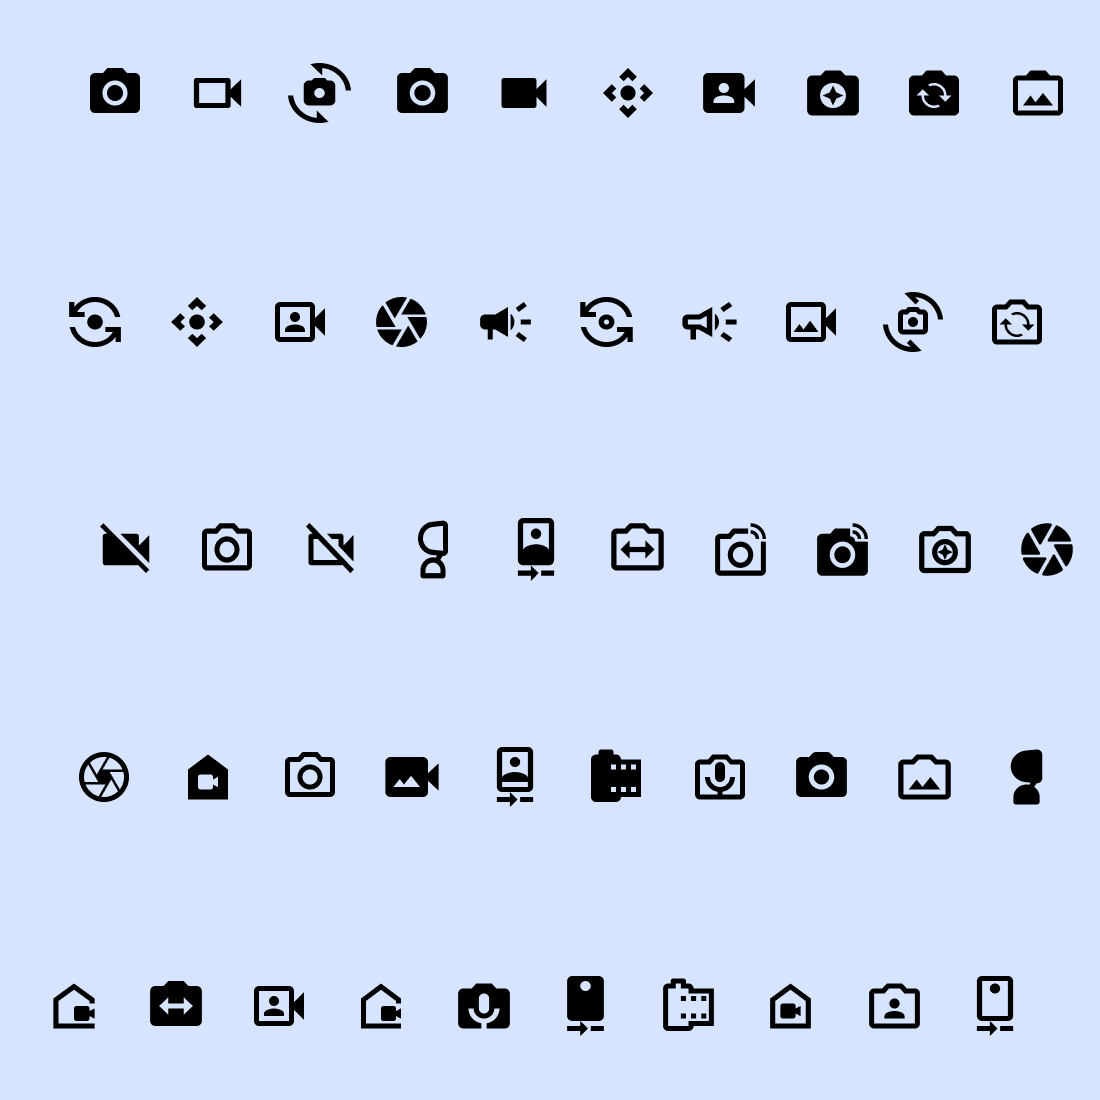 Google Material UI Icons Bundle cover image.